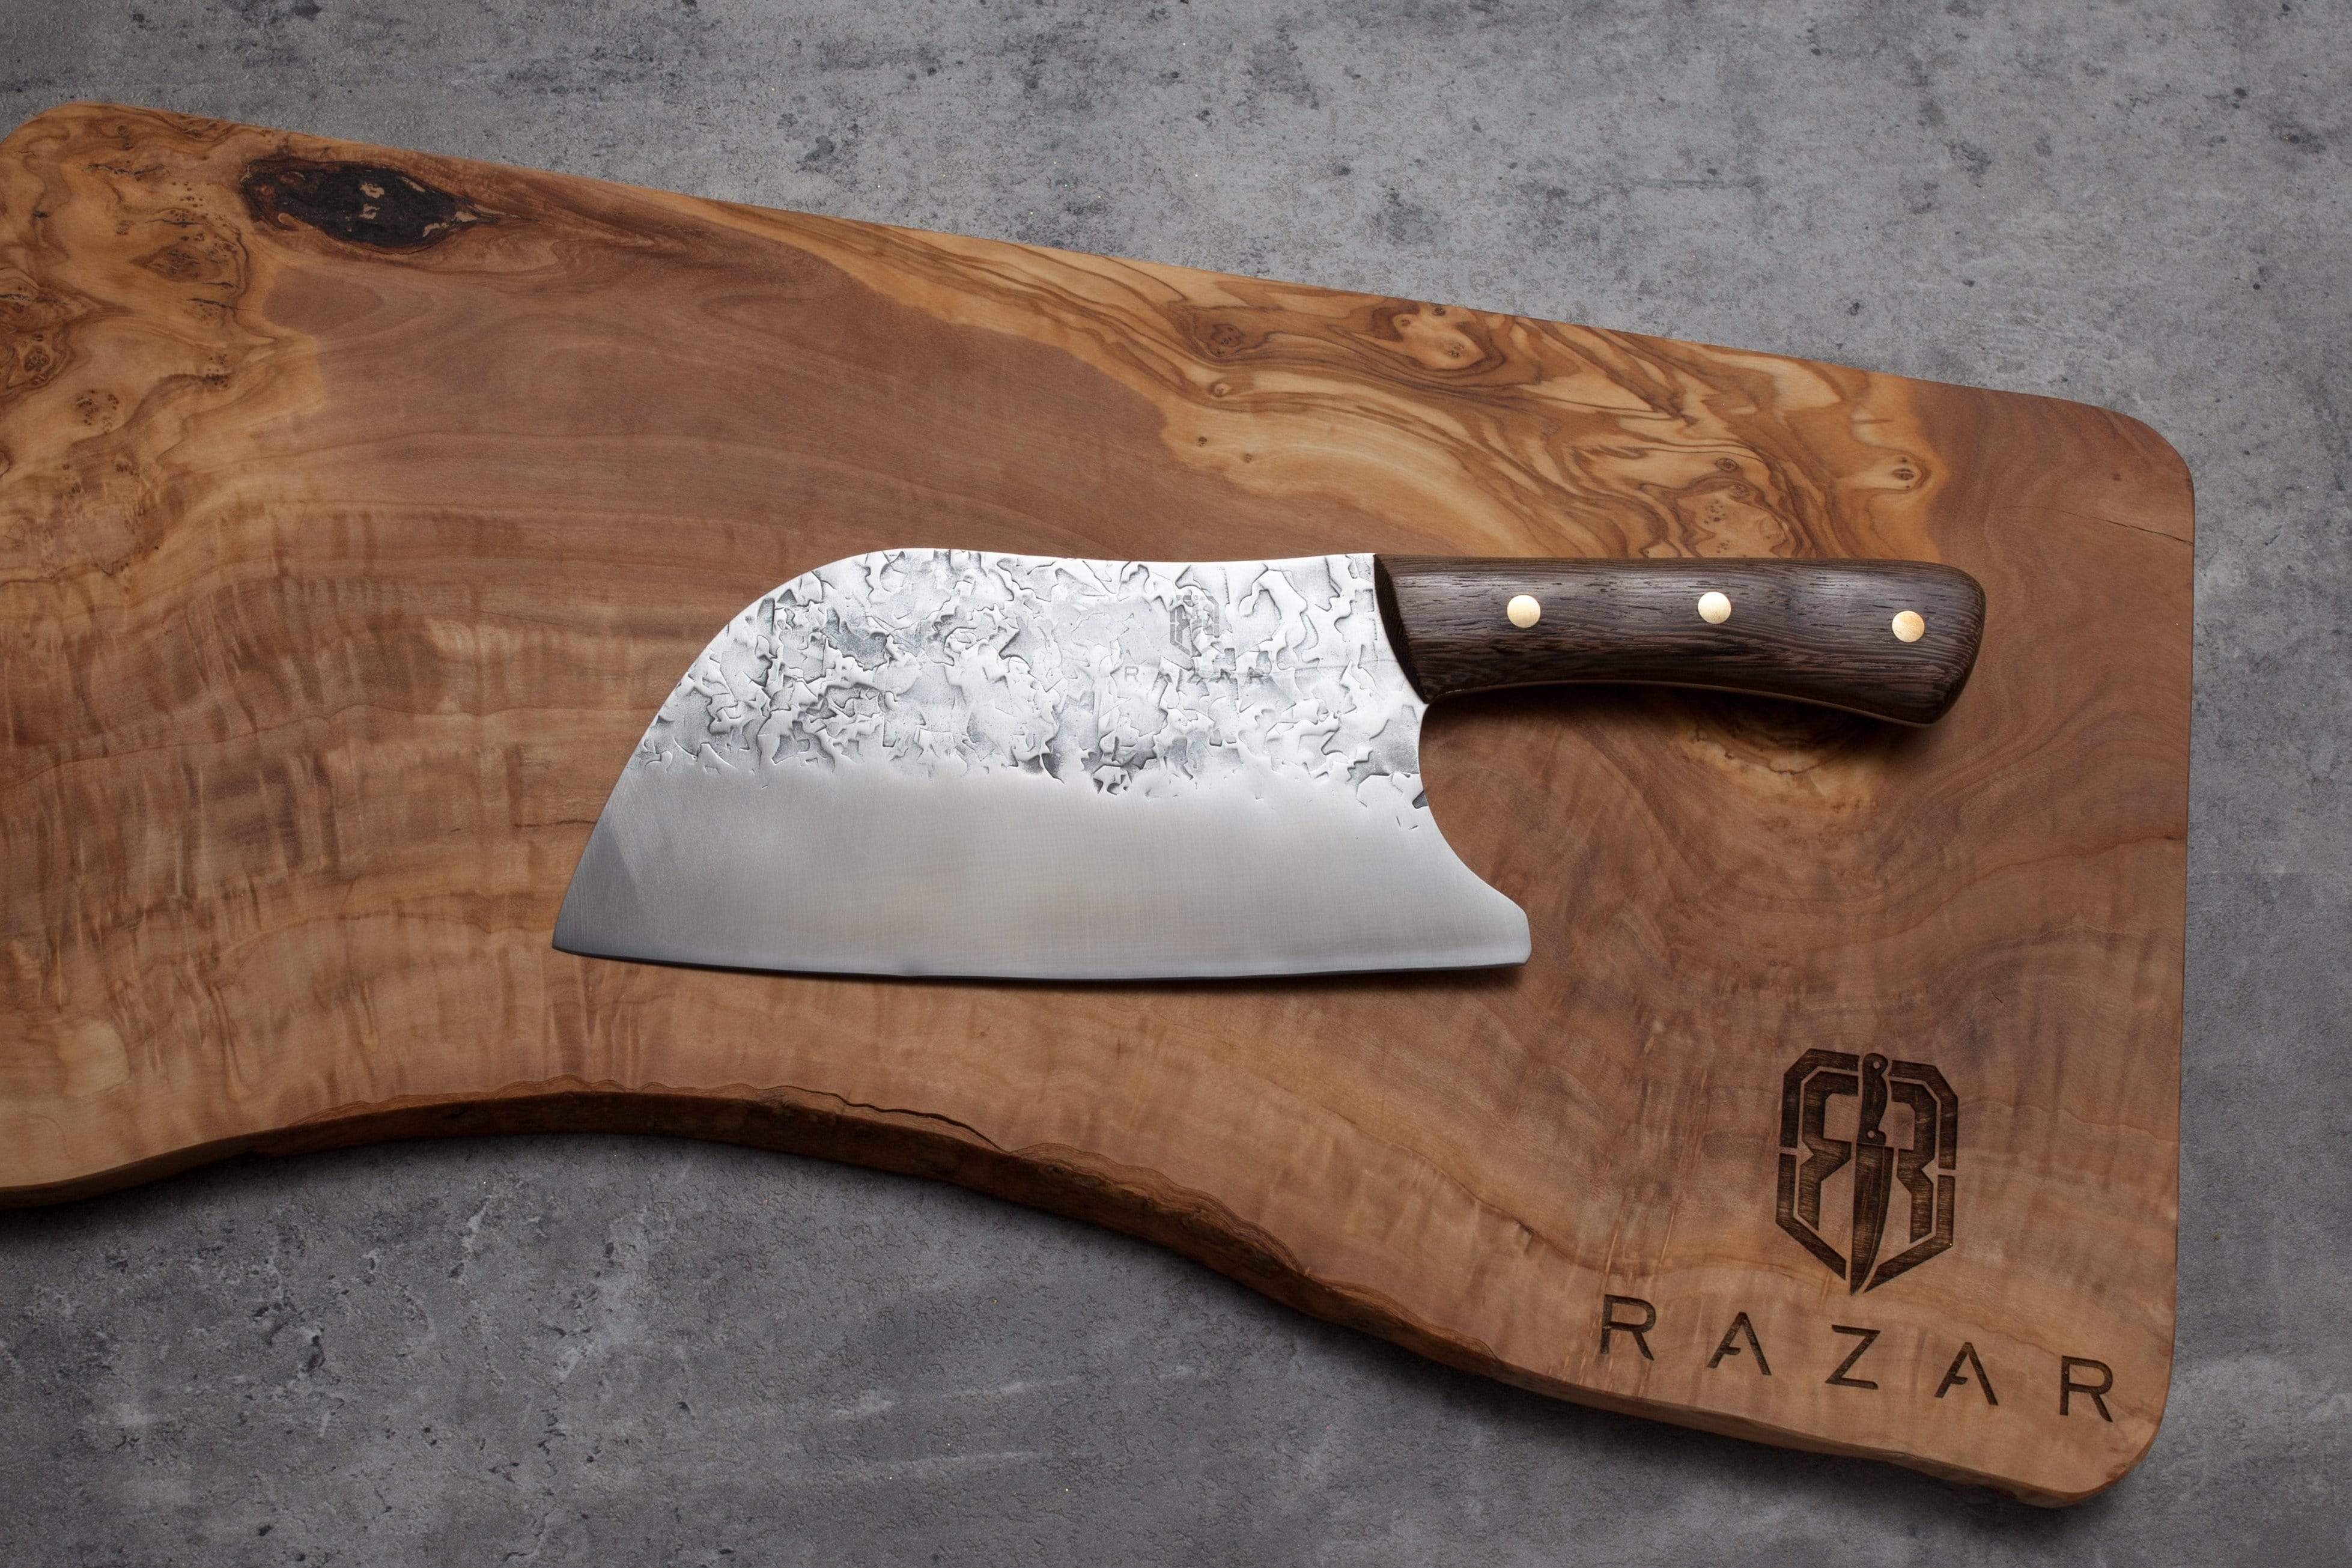 Serbian Chef Knife 7.5 | Gladiator Series | Dalstrong